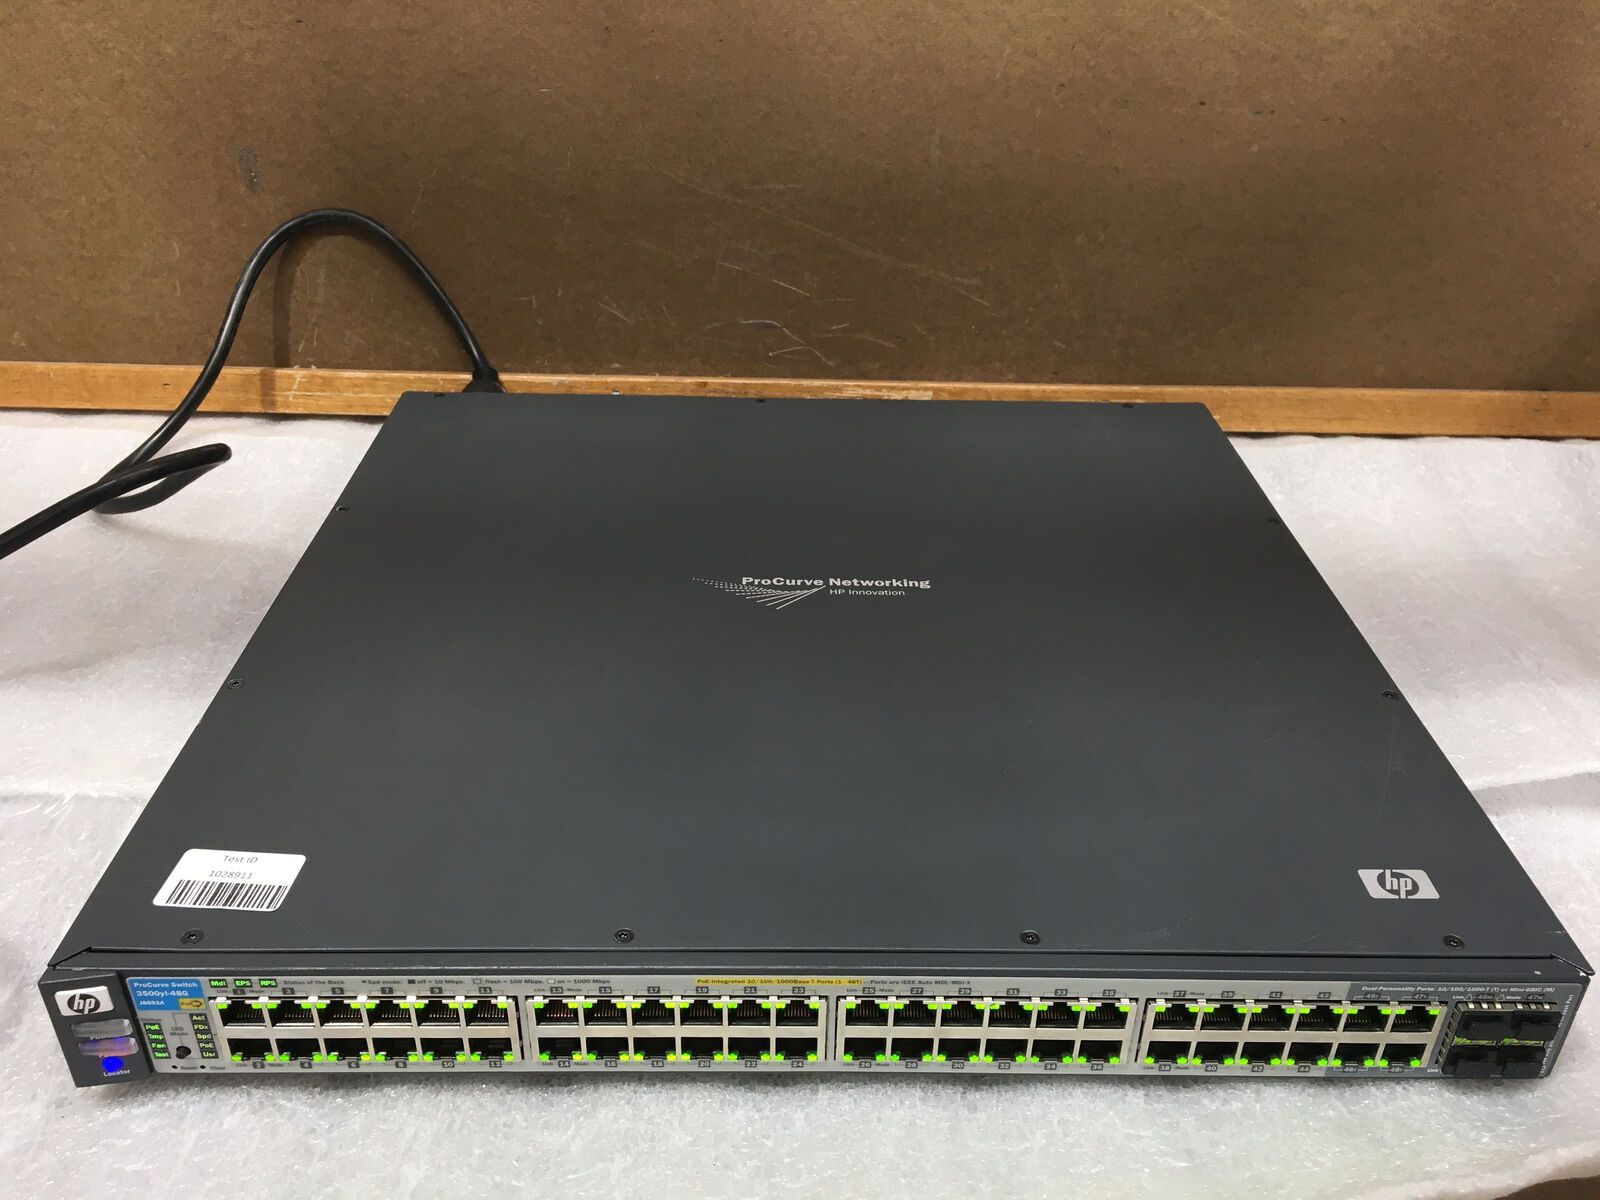 HP Procurve 3500YL-48G J8693A 48-Port PoE Gigabit Switch *TESTED AND WORKING*